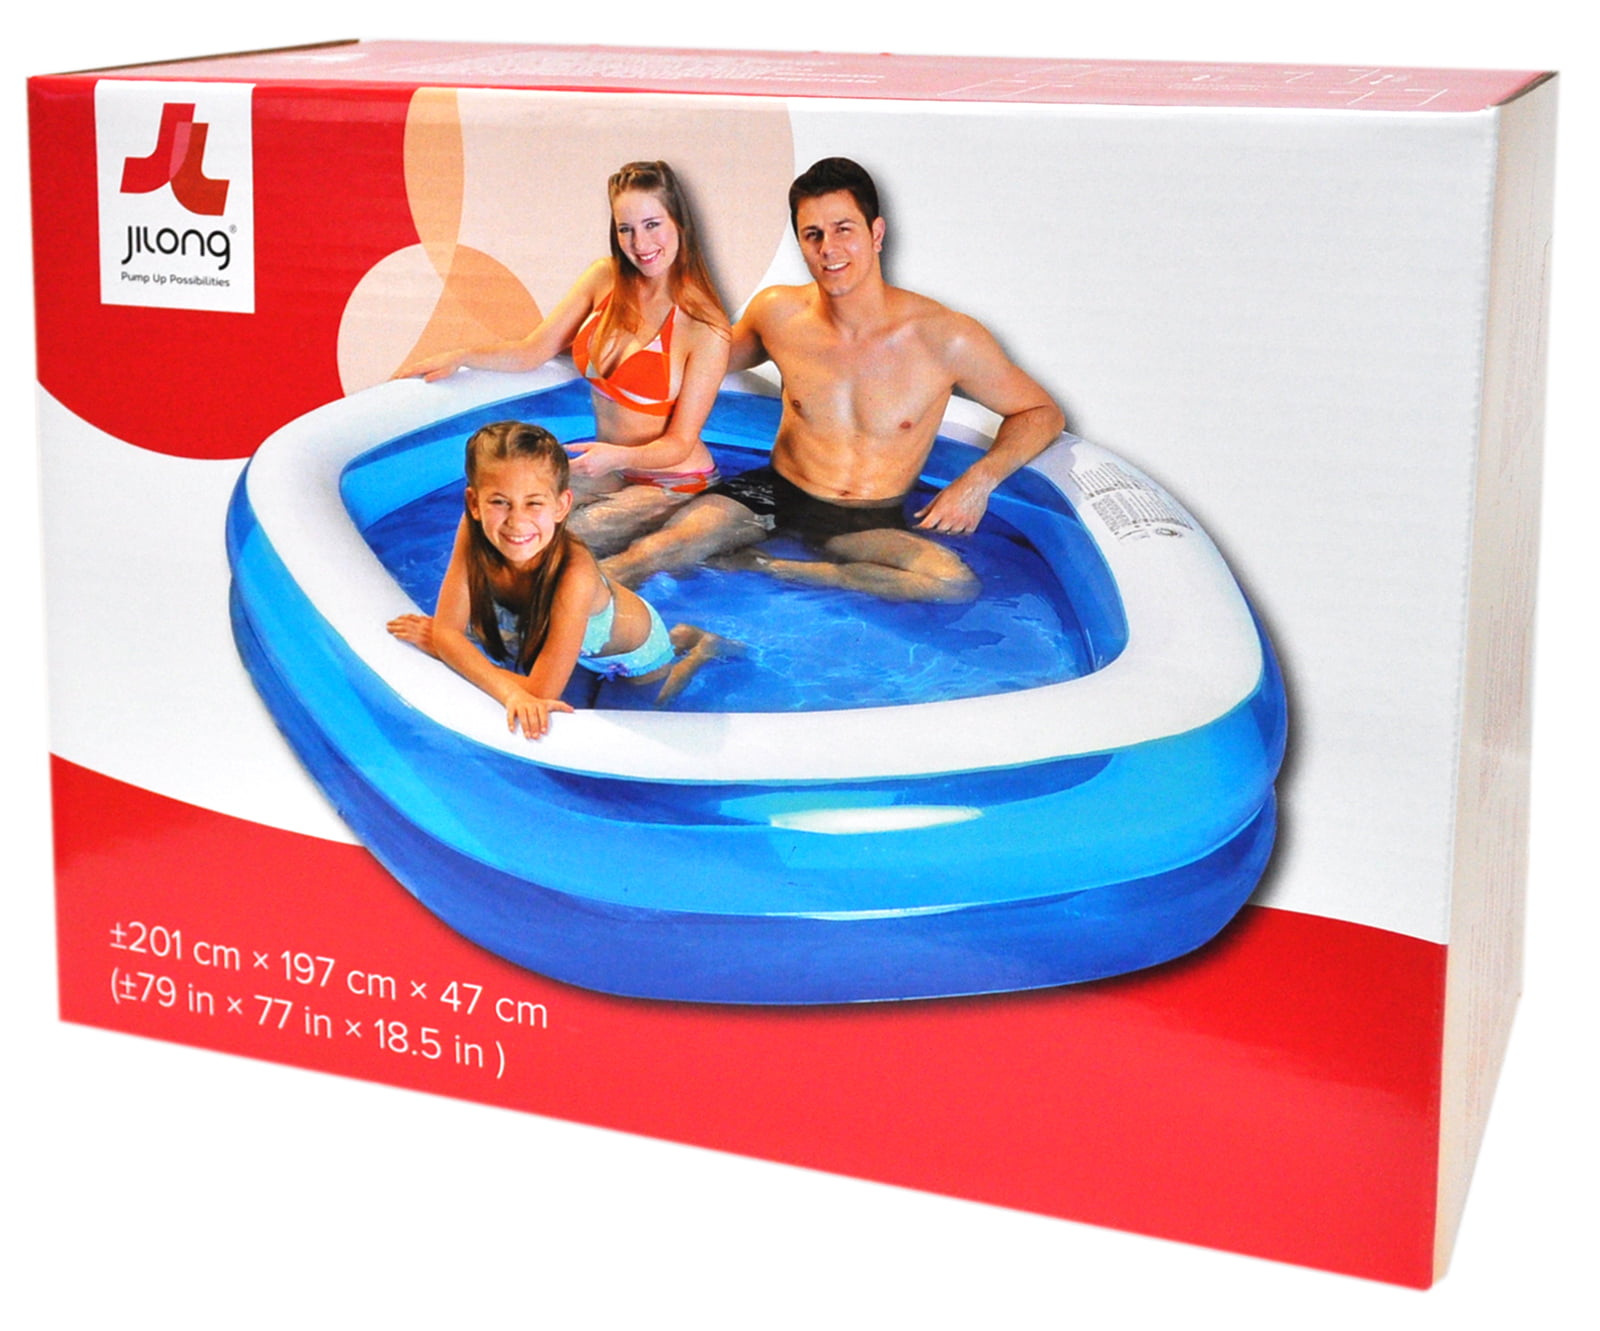 Giant Inflatable Above Ground Family Swimming Pool Pentagon